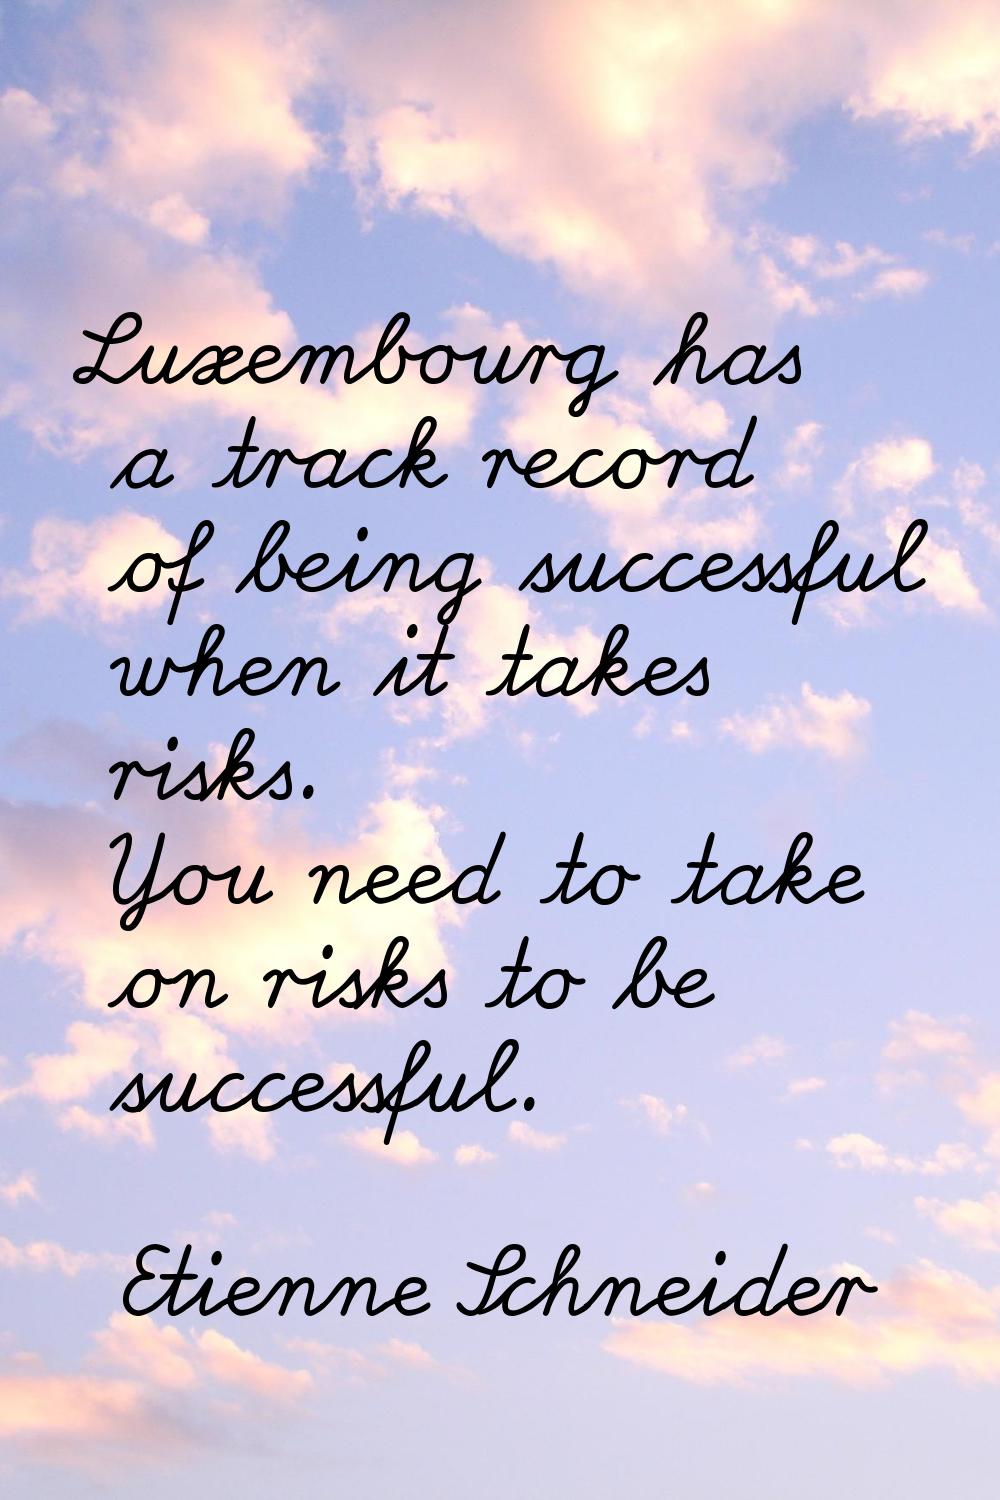 Luxembourg has a track record of being successful when it takes risks. You need to take on risks to